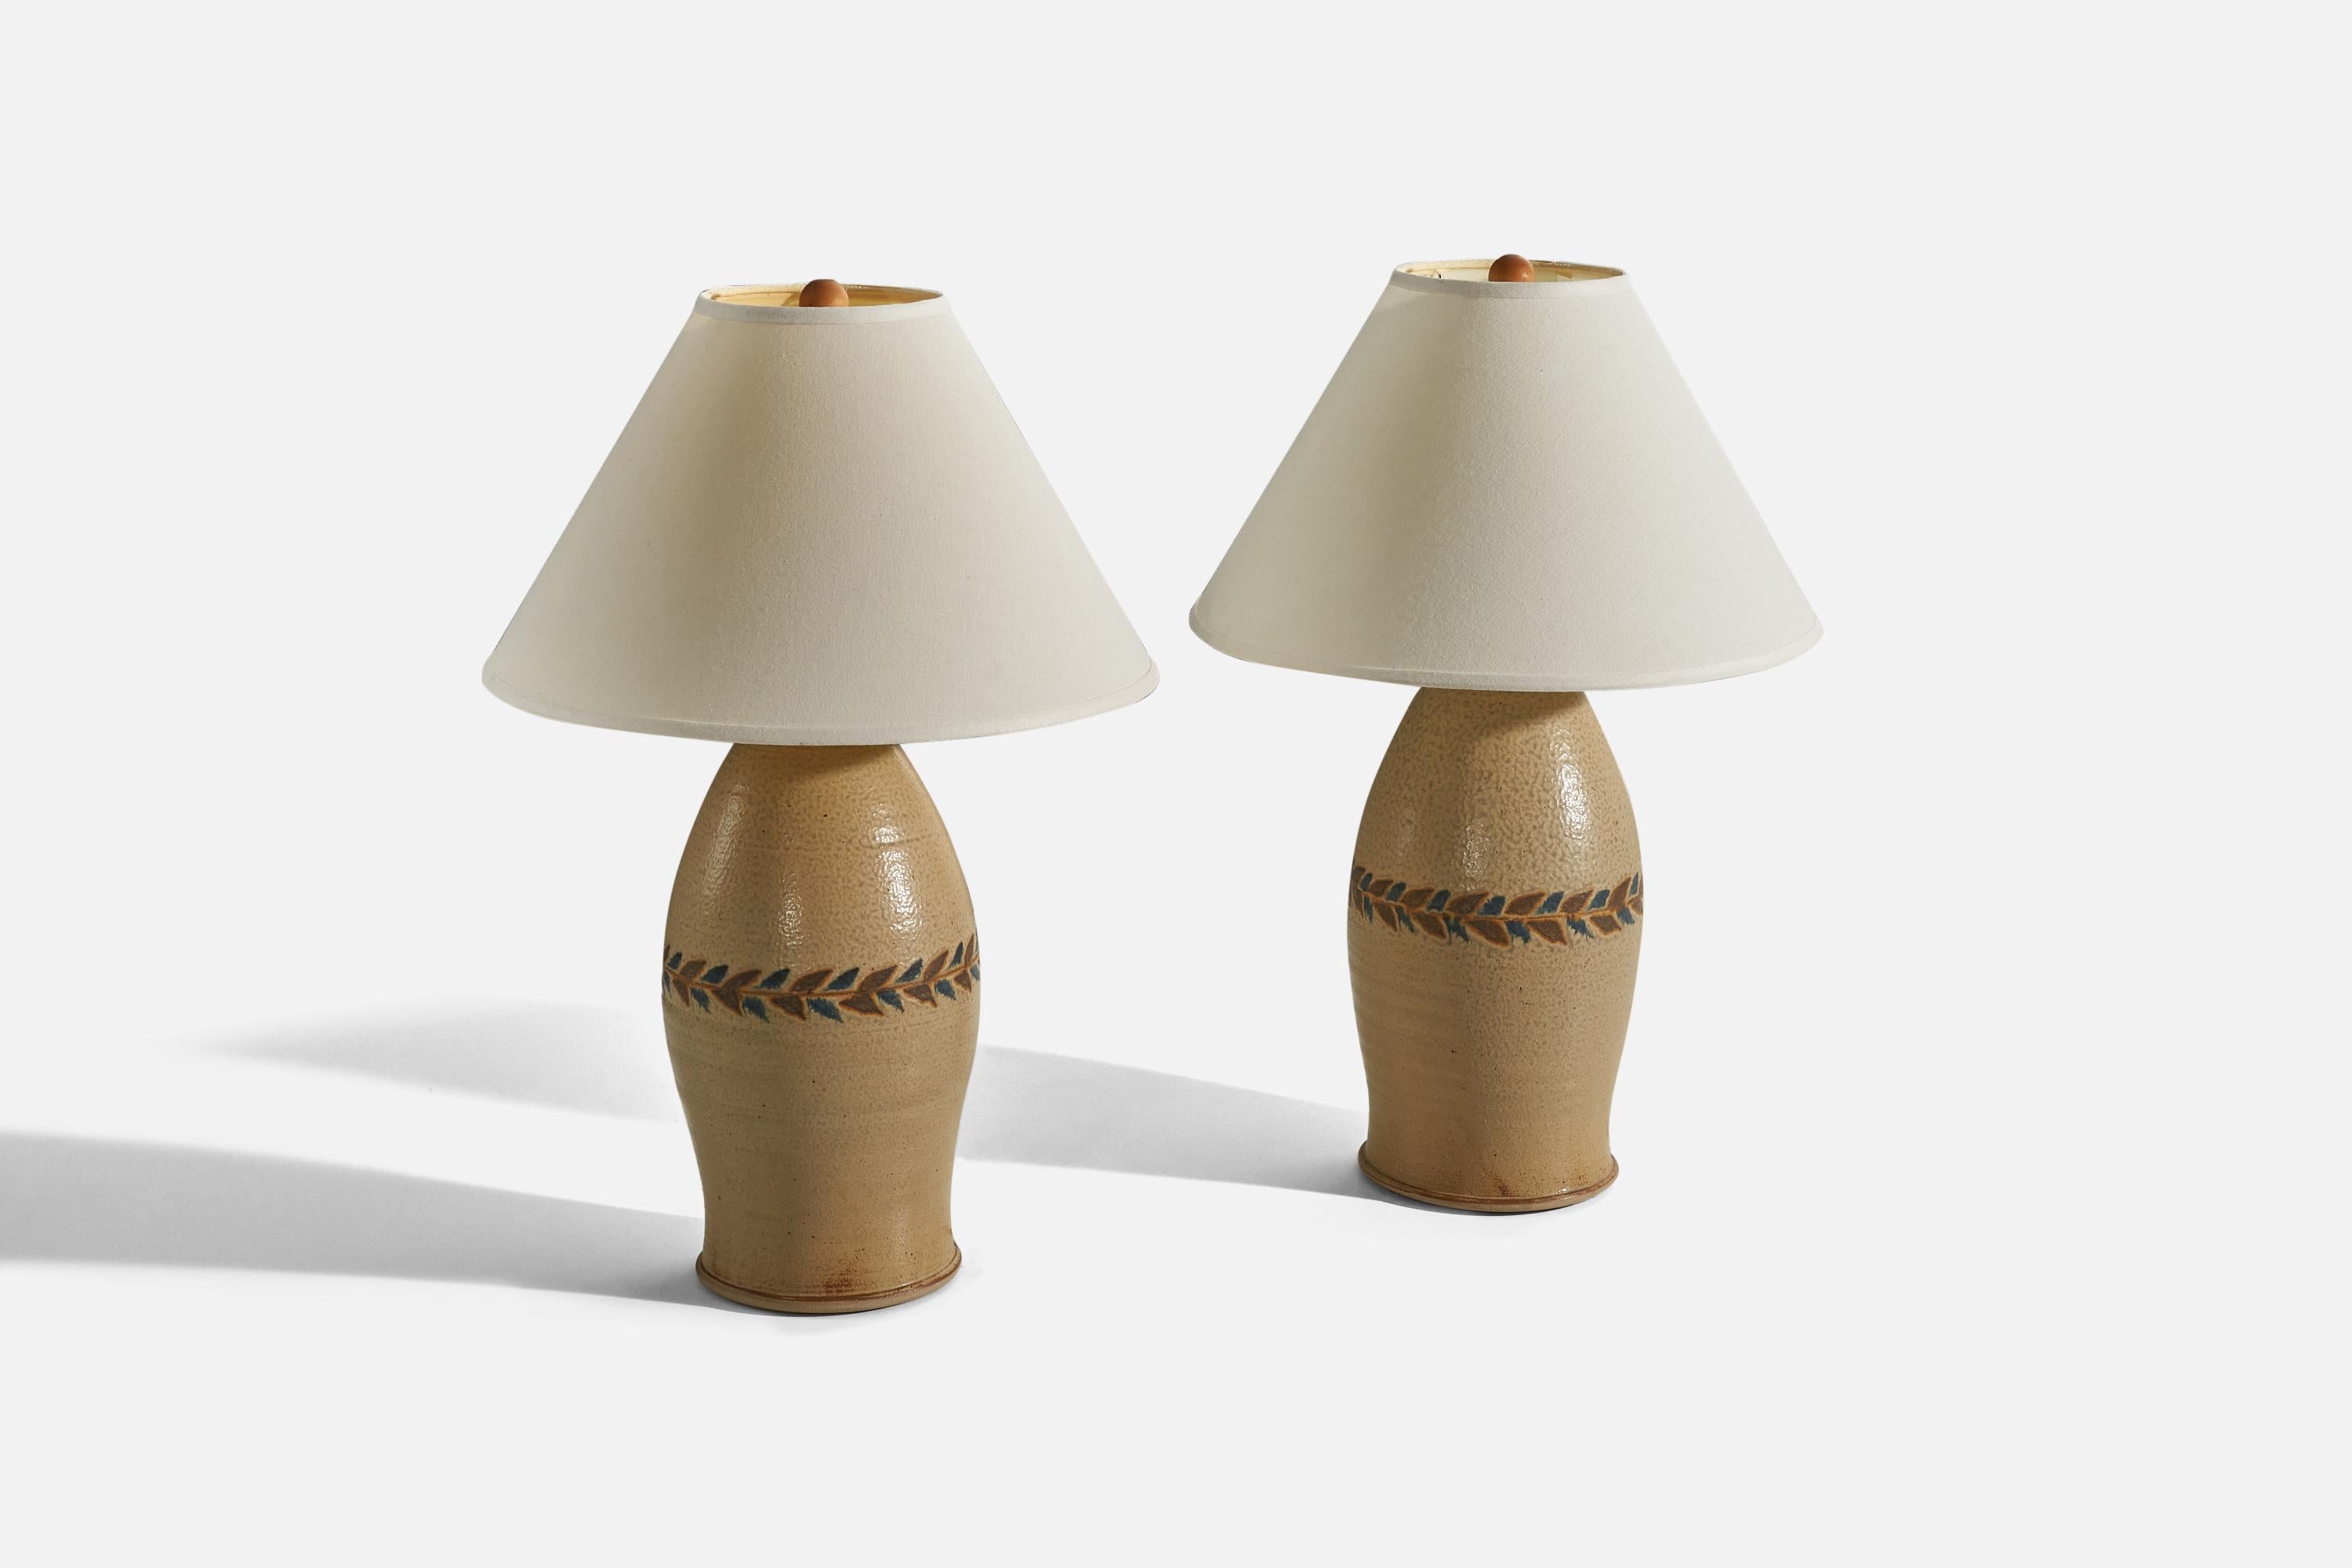 A pair of ceramic table lamps designed and produced in the United States, 1970s.

Sold without lampshade. 
Dimensions of Lamp (inches) : 18.62 x 8.62 x 8.62 (H x W x D)
Dimensions of Shade (inches) : 6 x 17.25 x 11 (T x B x S)
Dimension of Lamp